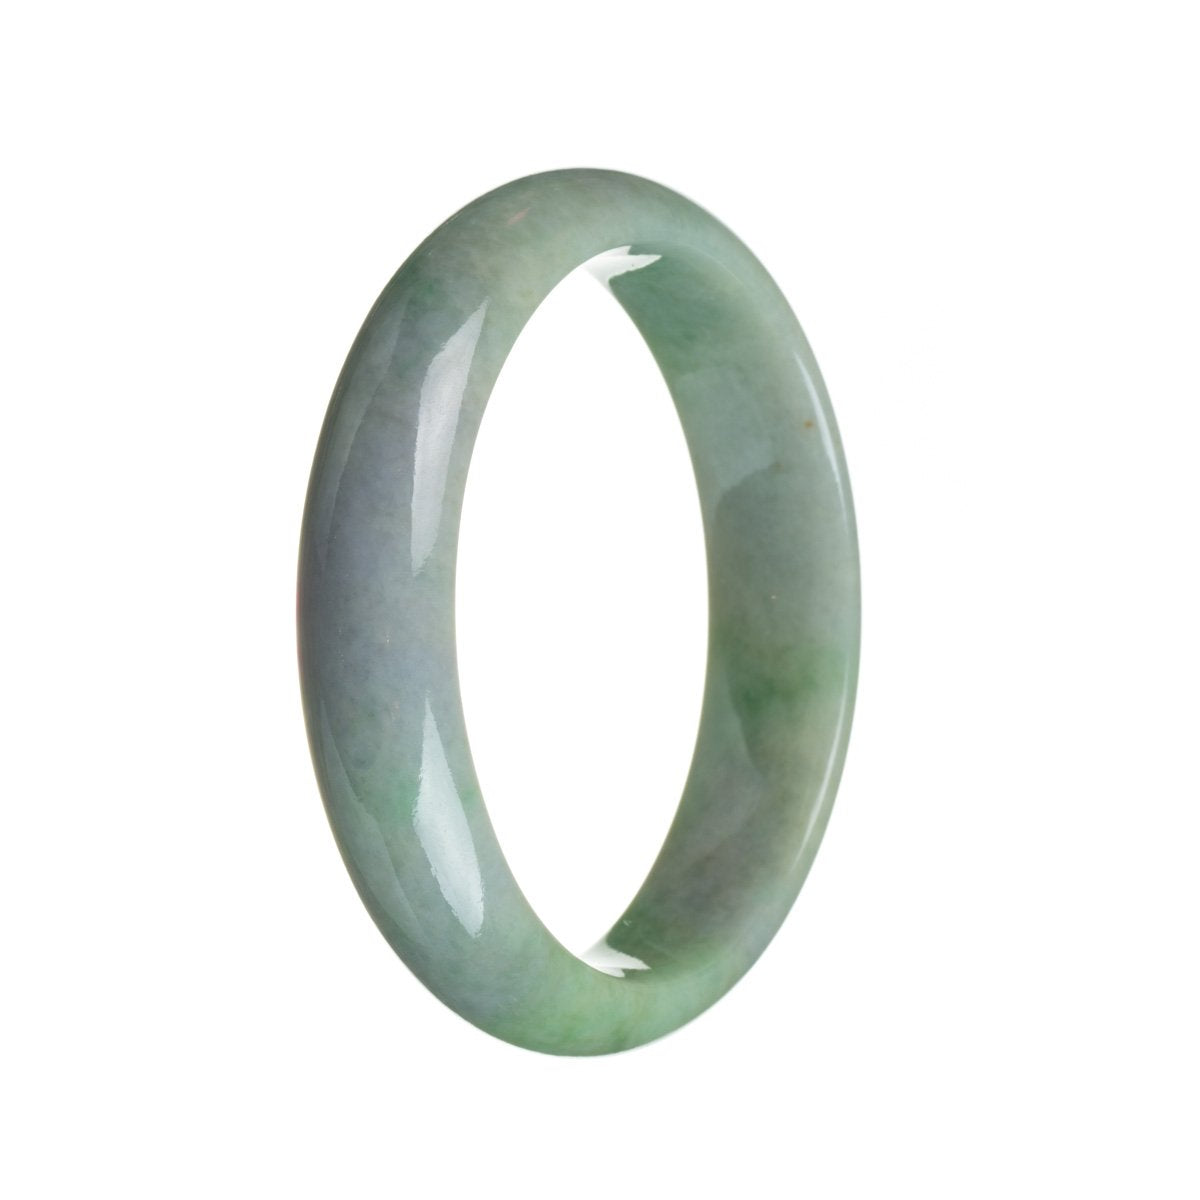 A close-up of a stunning jade bangle bracelet, featuring a vibrant green and lavender color. The bracelet is made of high-quality grade A jadeite and has a unique half-moon shape, measuring 59mm in diameter. Perfect for adding a touch of elegance to any outfit.